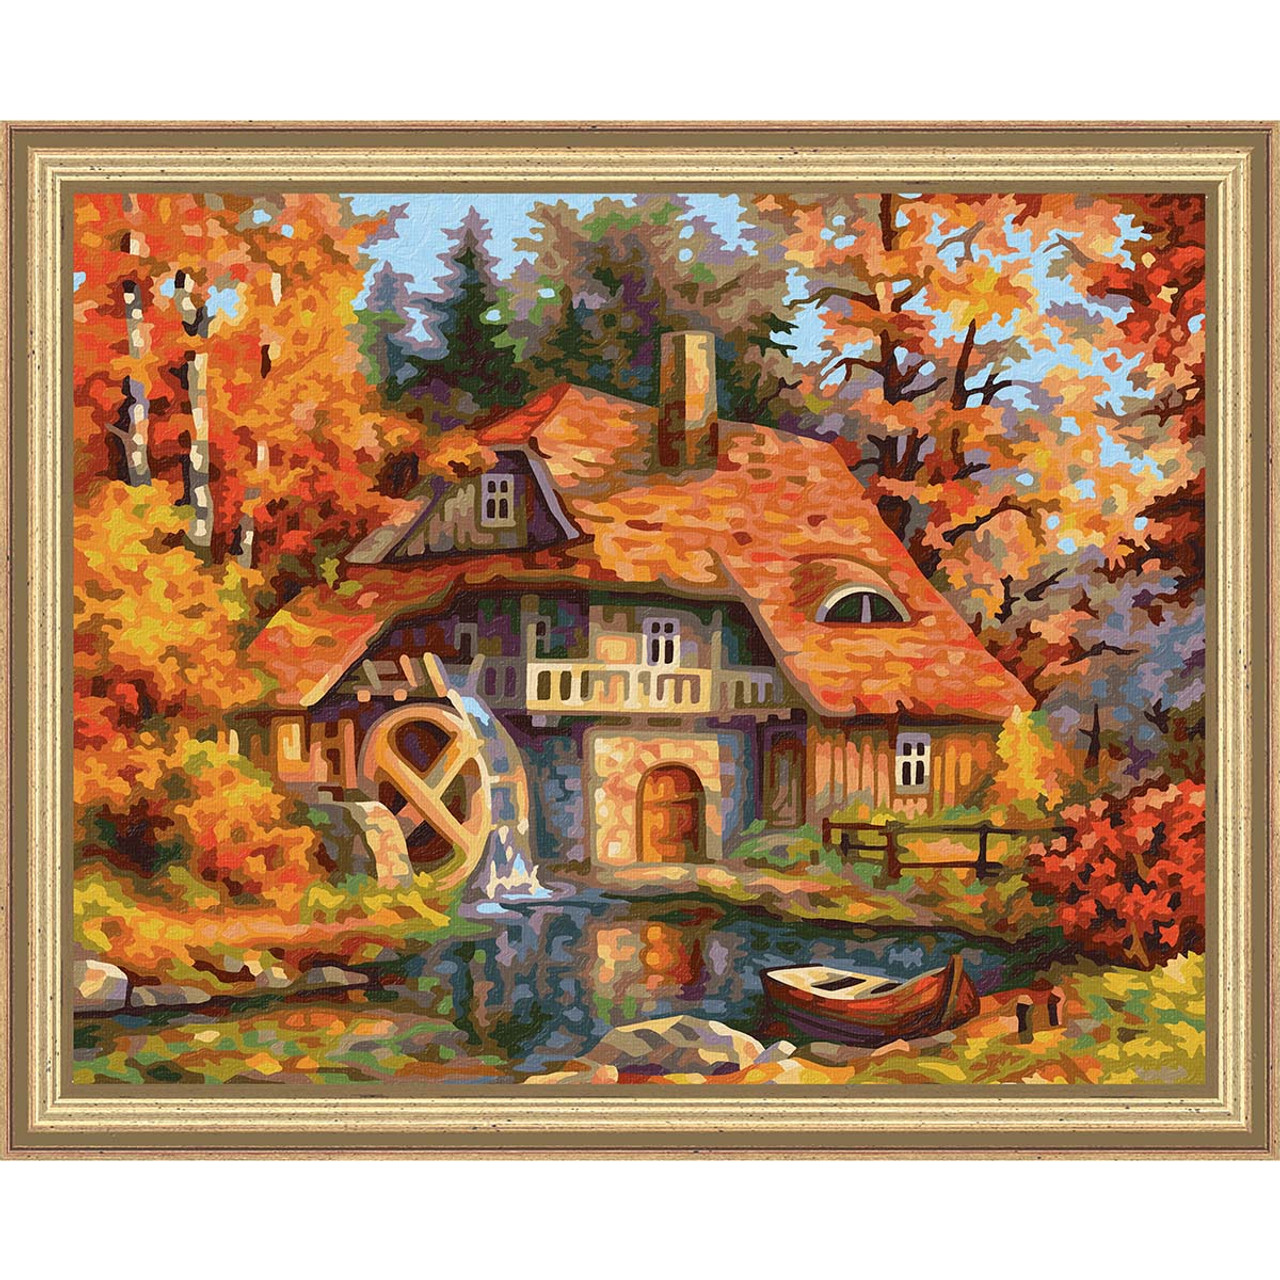 Schipper MNZ-Tuscan Idyll Paint by Number Kit 